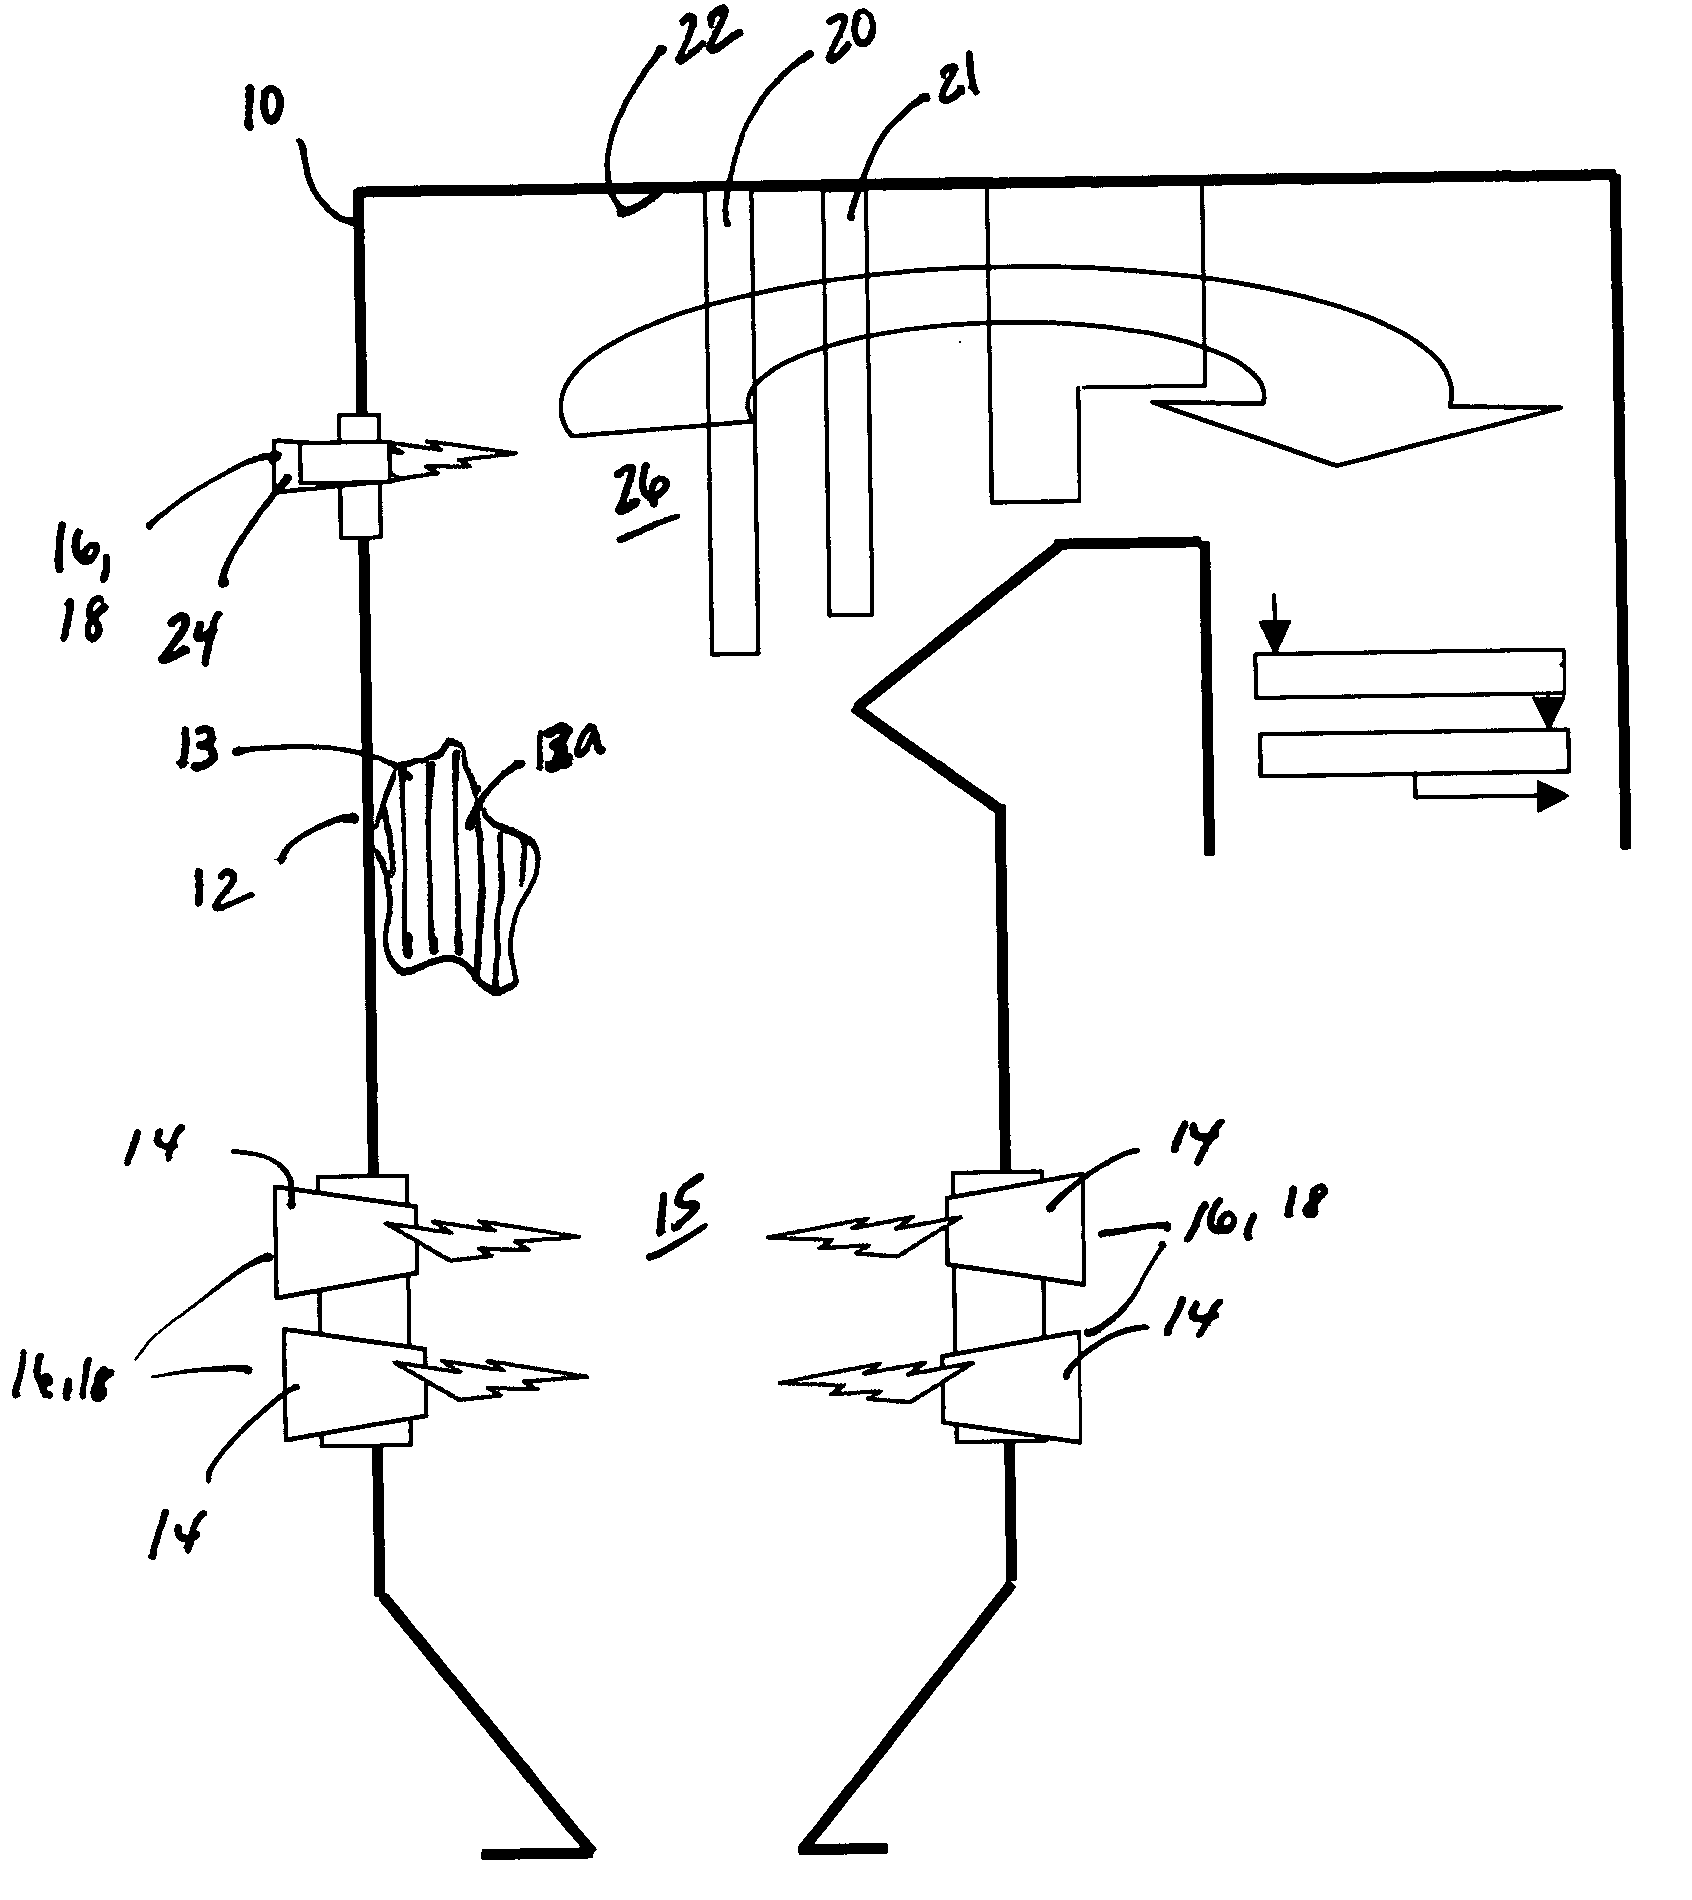 Device and method for boiler superheat temperature control